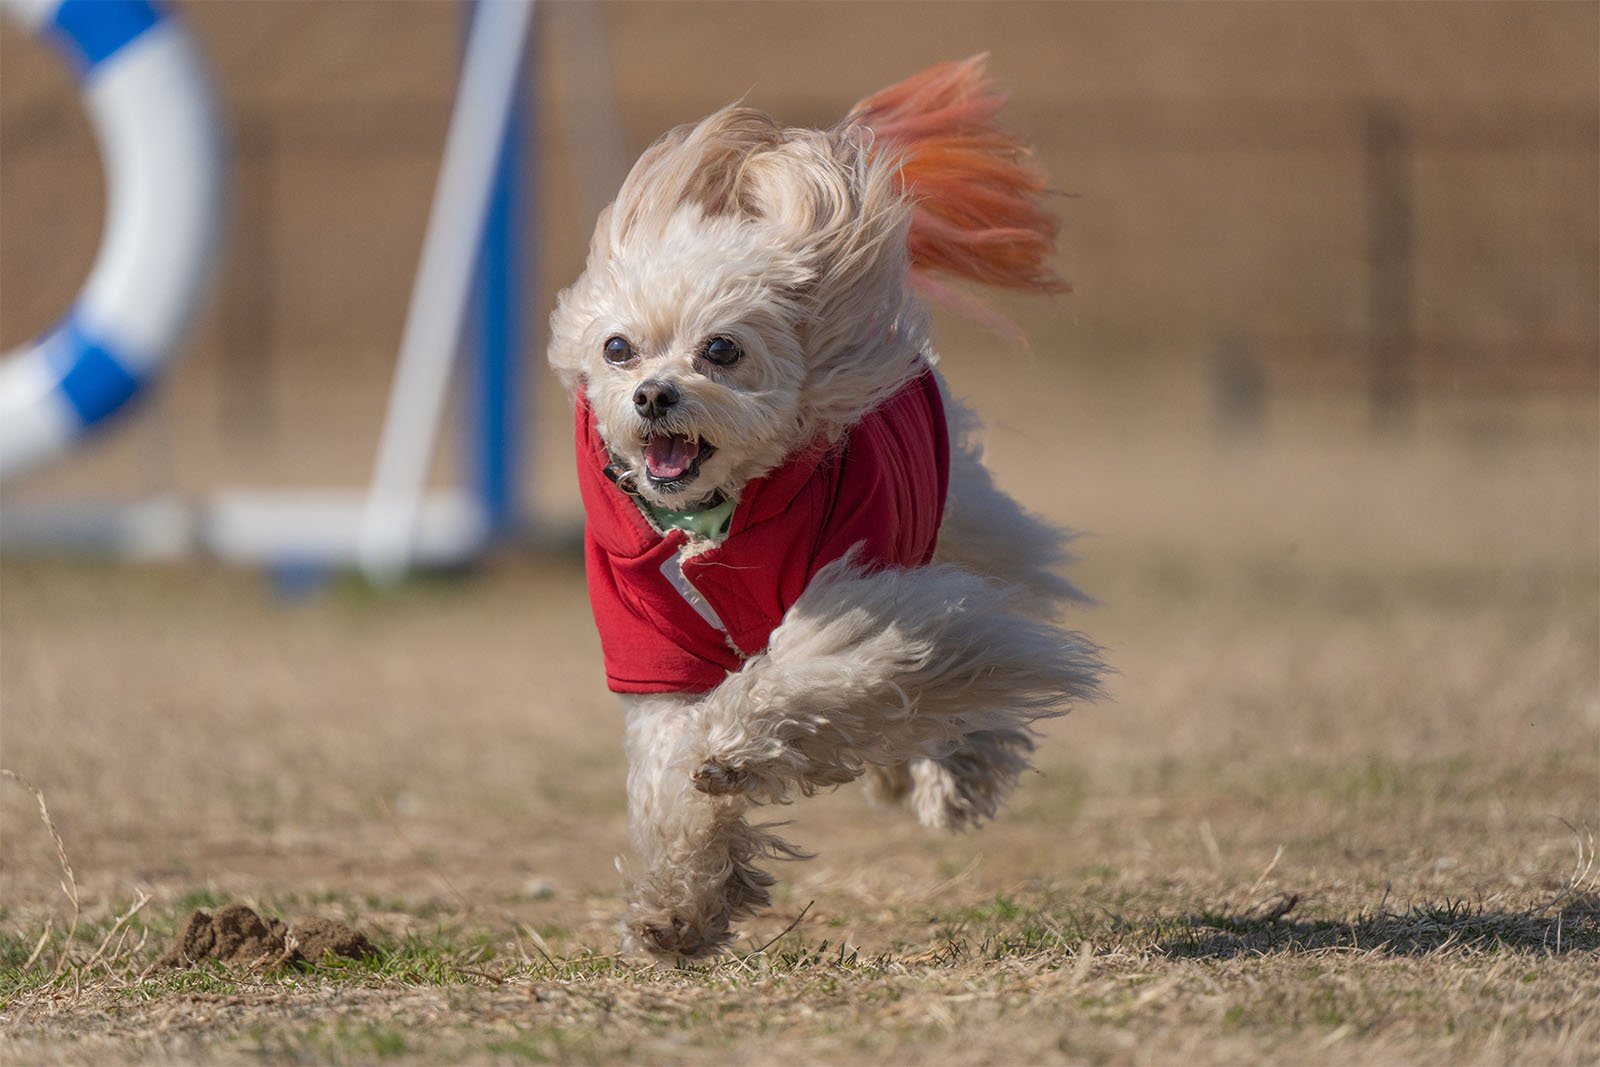 A small, fluffy dog wearing a red jacket runs energetically across a grassy field. The dog's fur is blowing in the wind, and its tongue is out, indicating excitement. An agility training obstacle is blurred in the background.